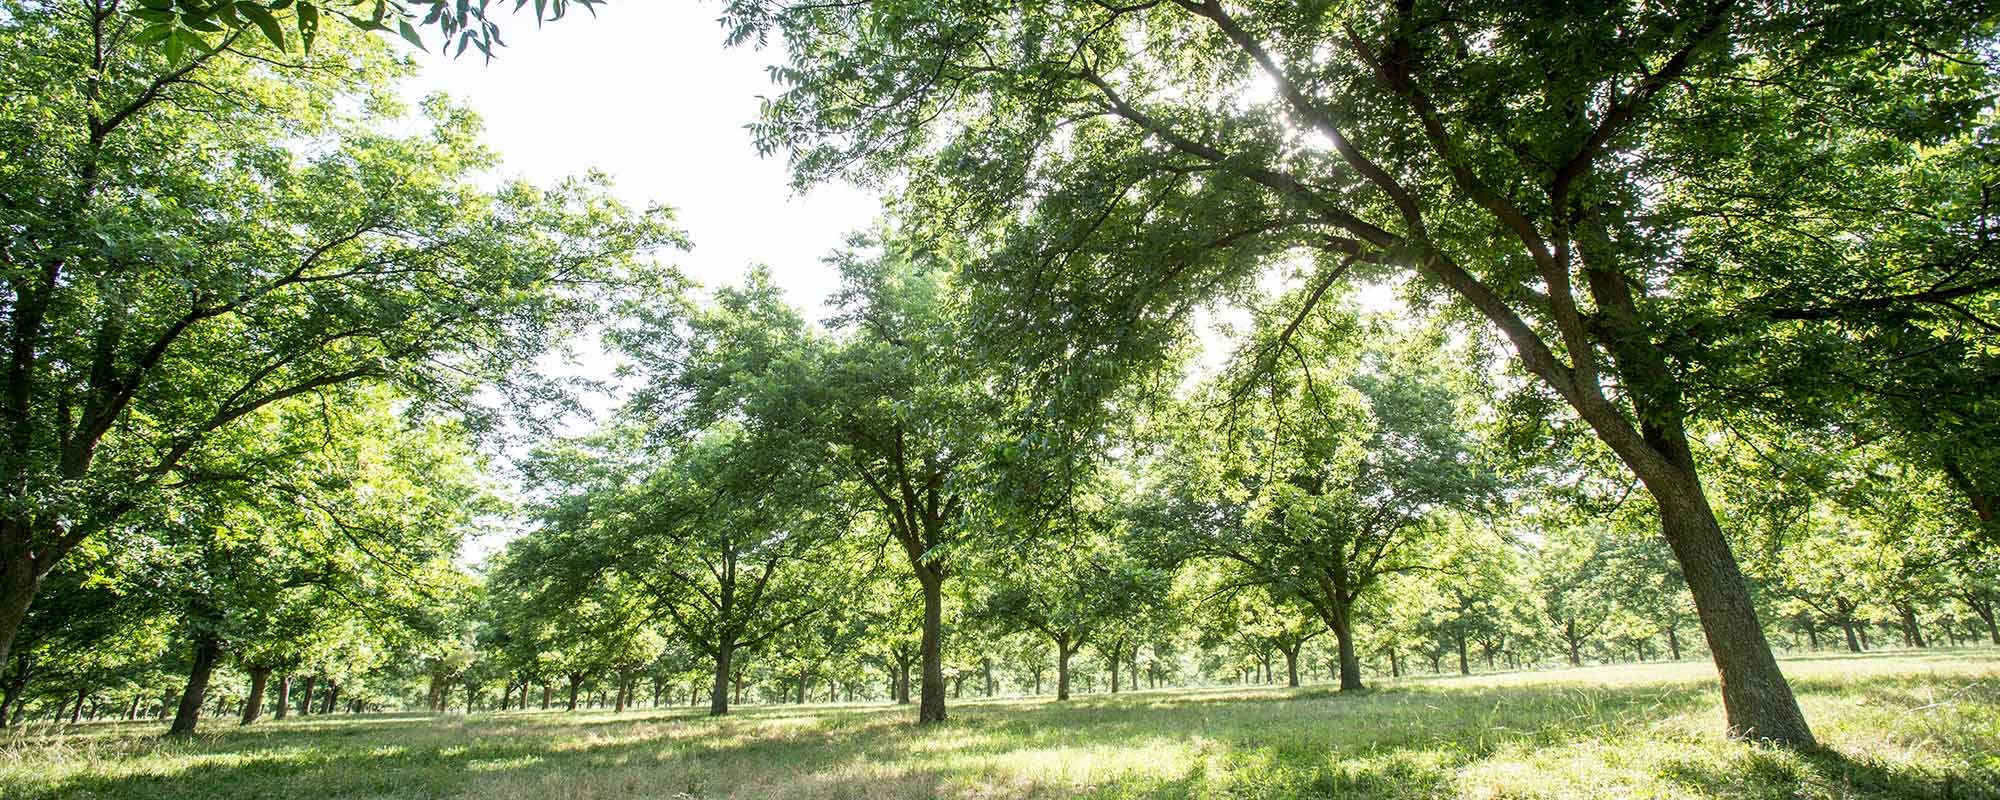 Assessing the Value of Pecan Trees